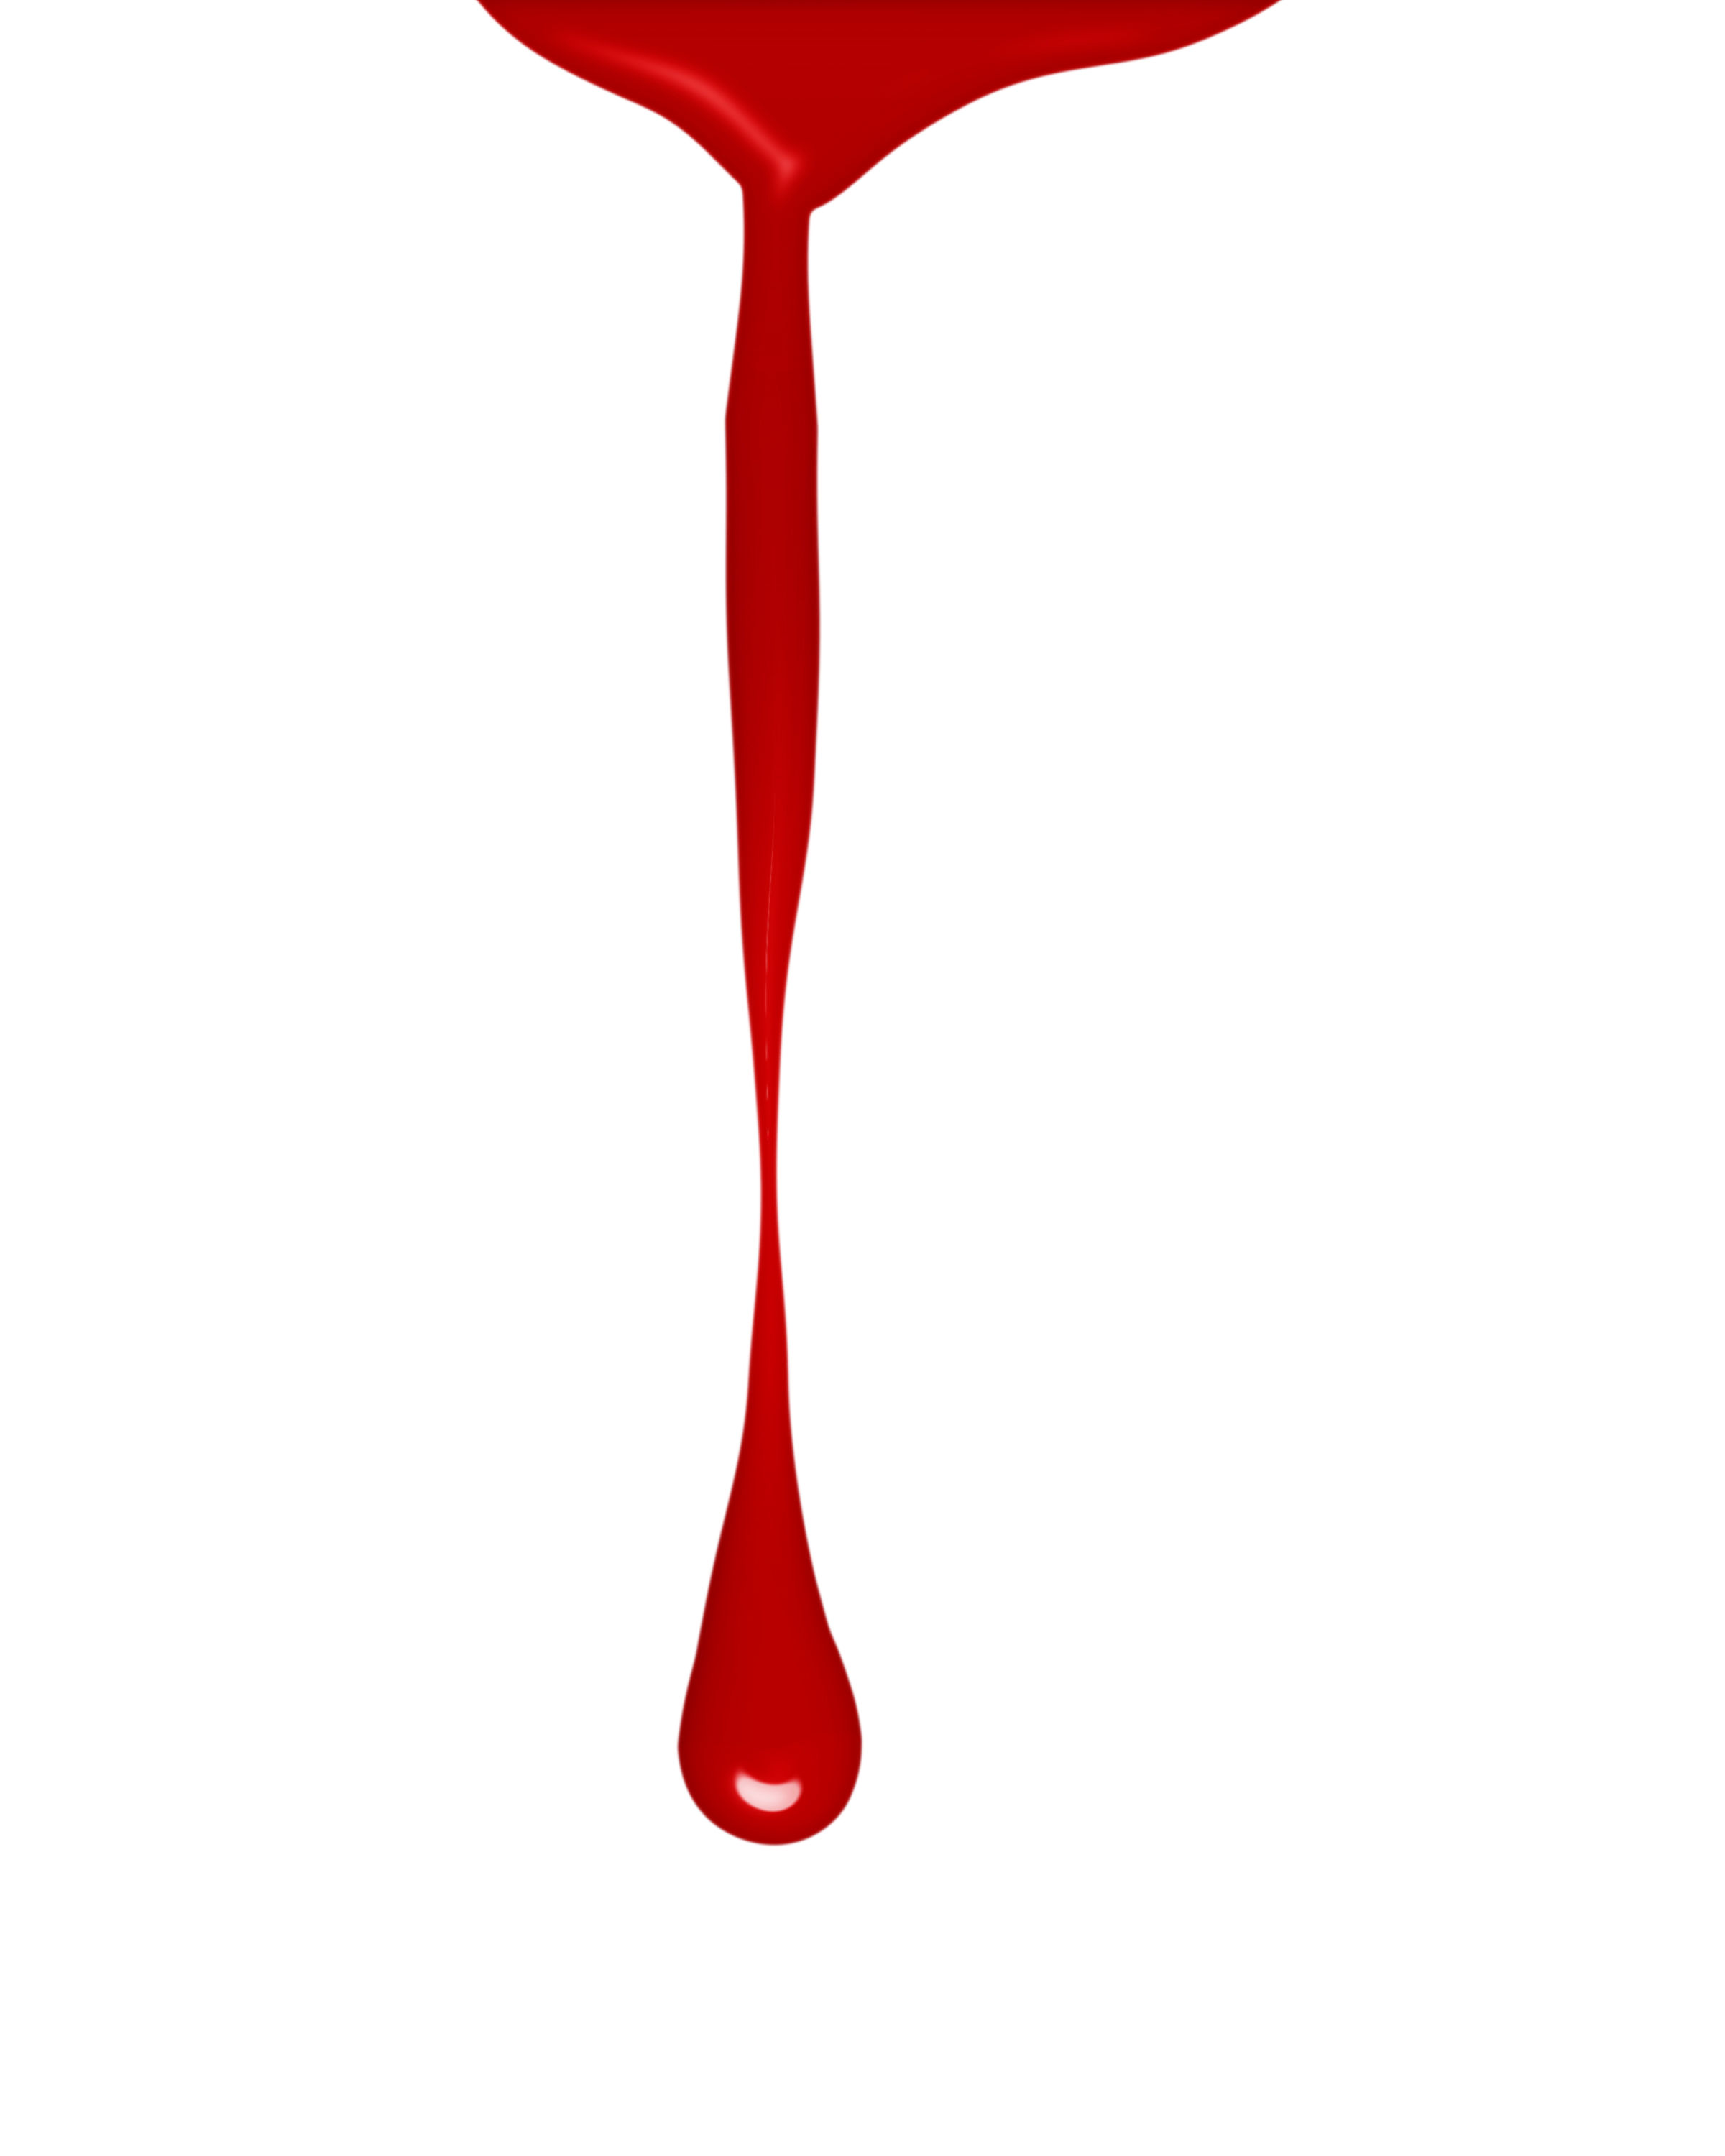 dripping blood clipart free - photo #32